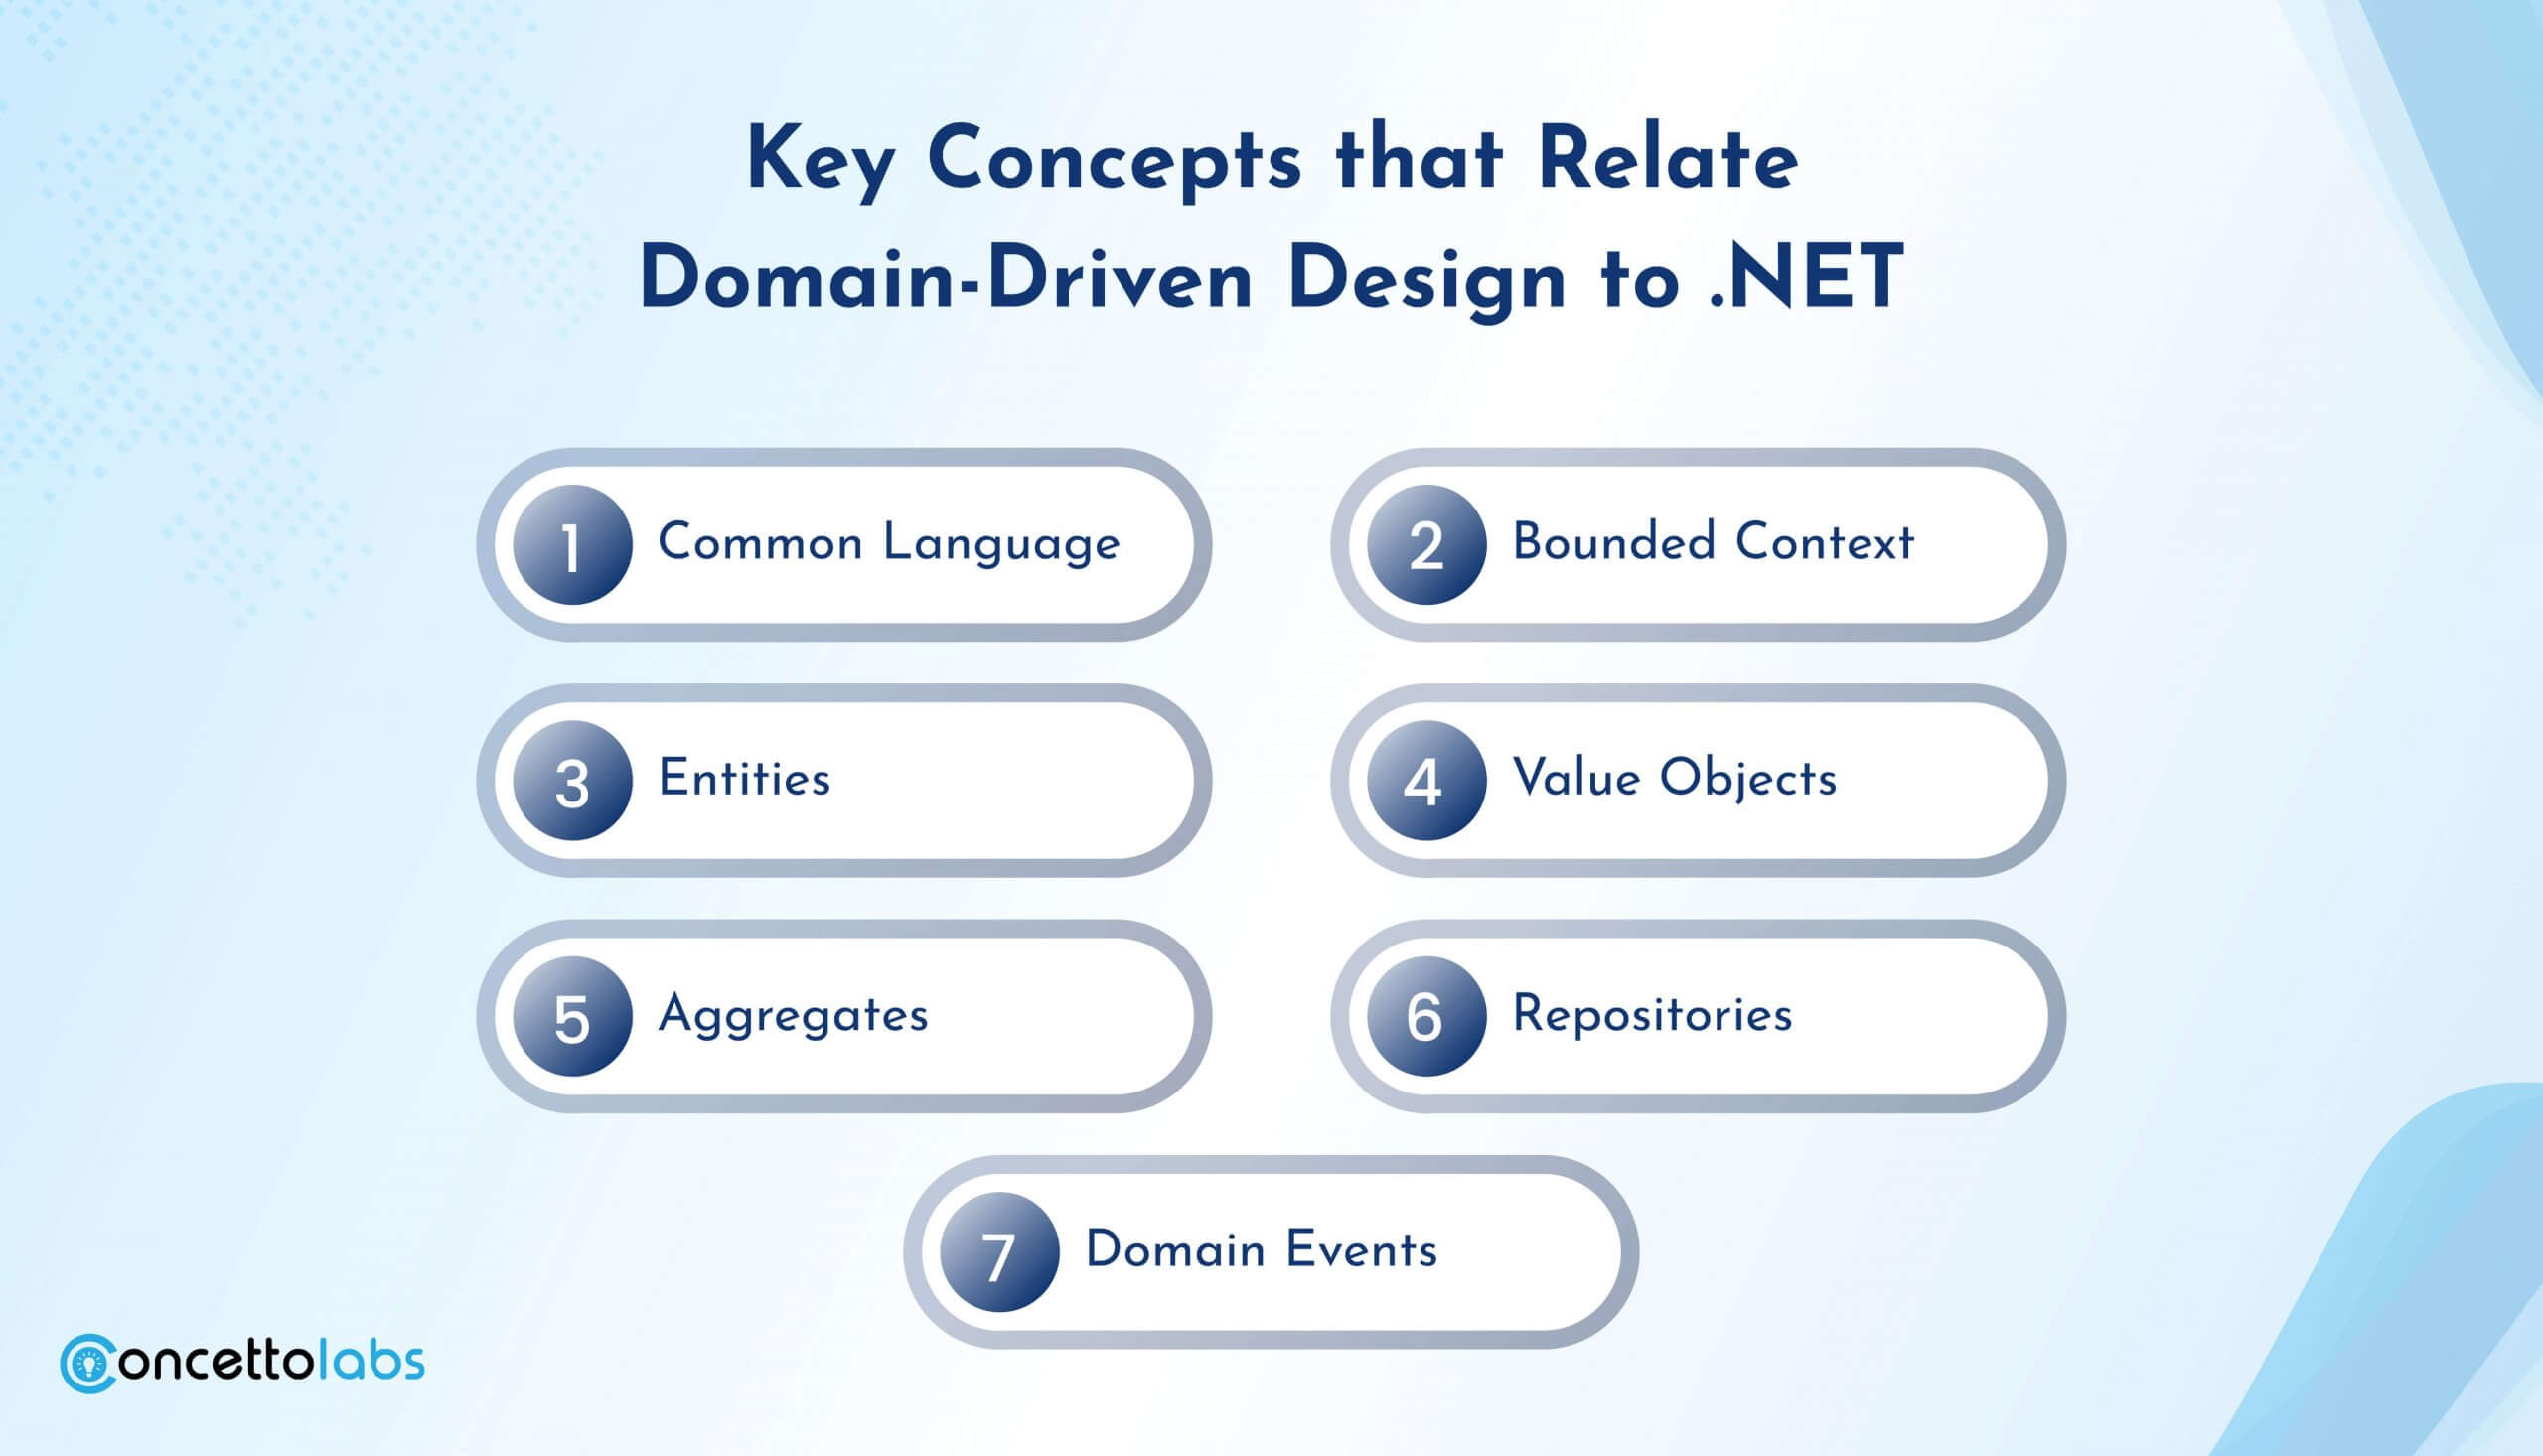 Which are the Key Concepts that Relate Domain-Driven Design to .NET?